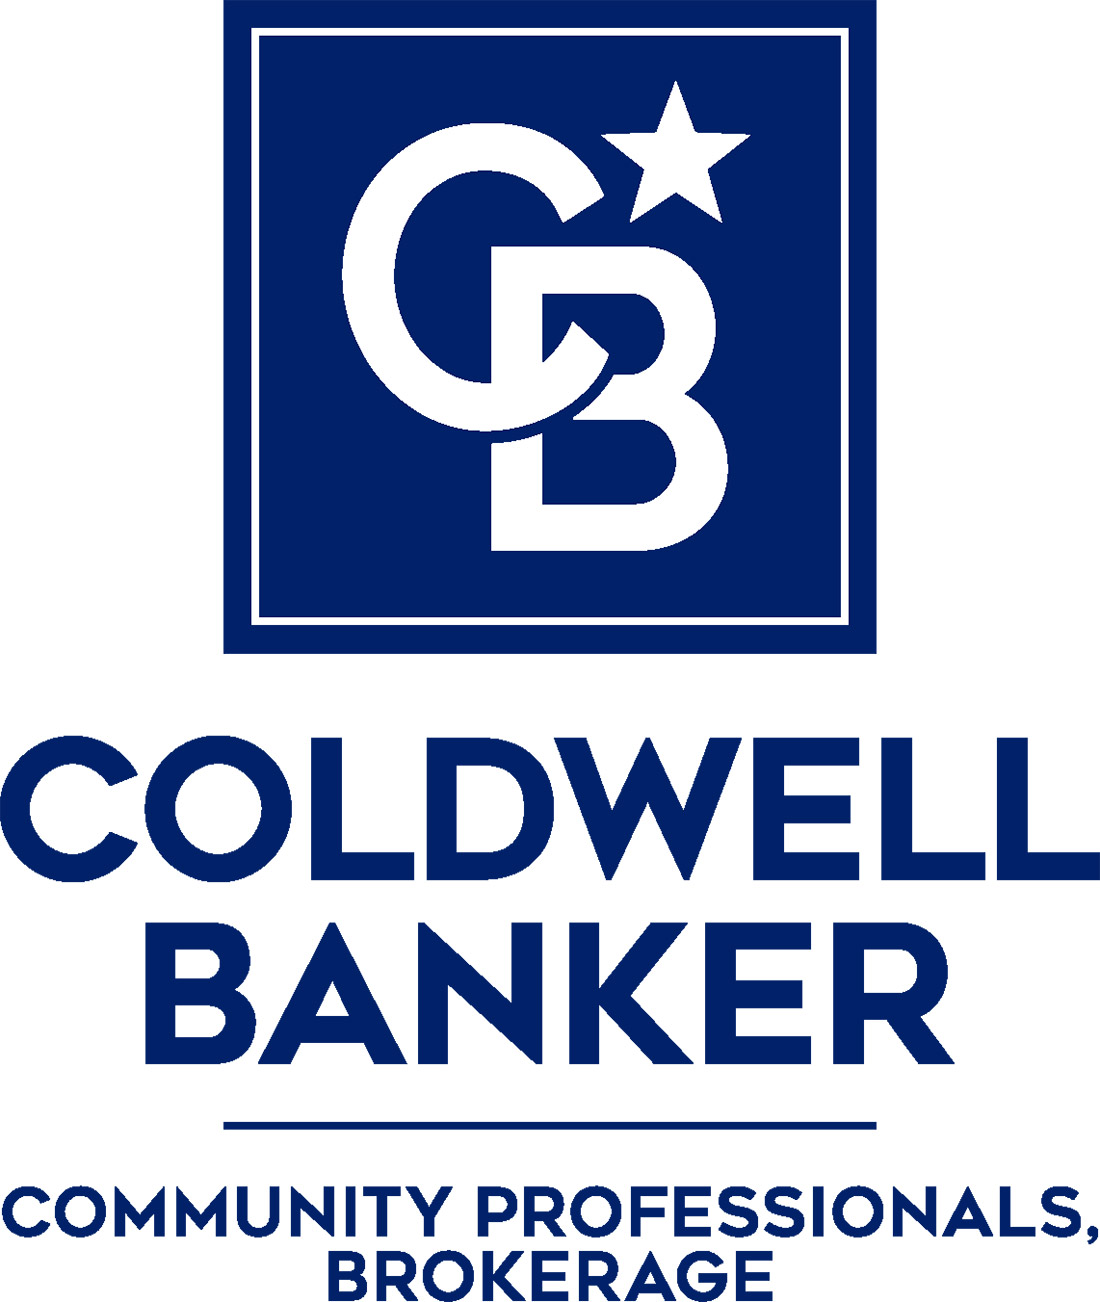 Val Dalgetty-Rigthon - Coldwell Banker Community Professionals Logo